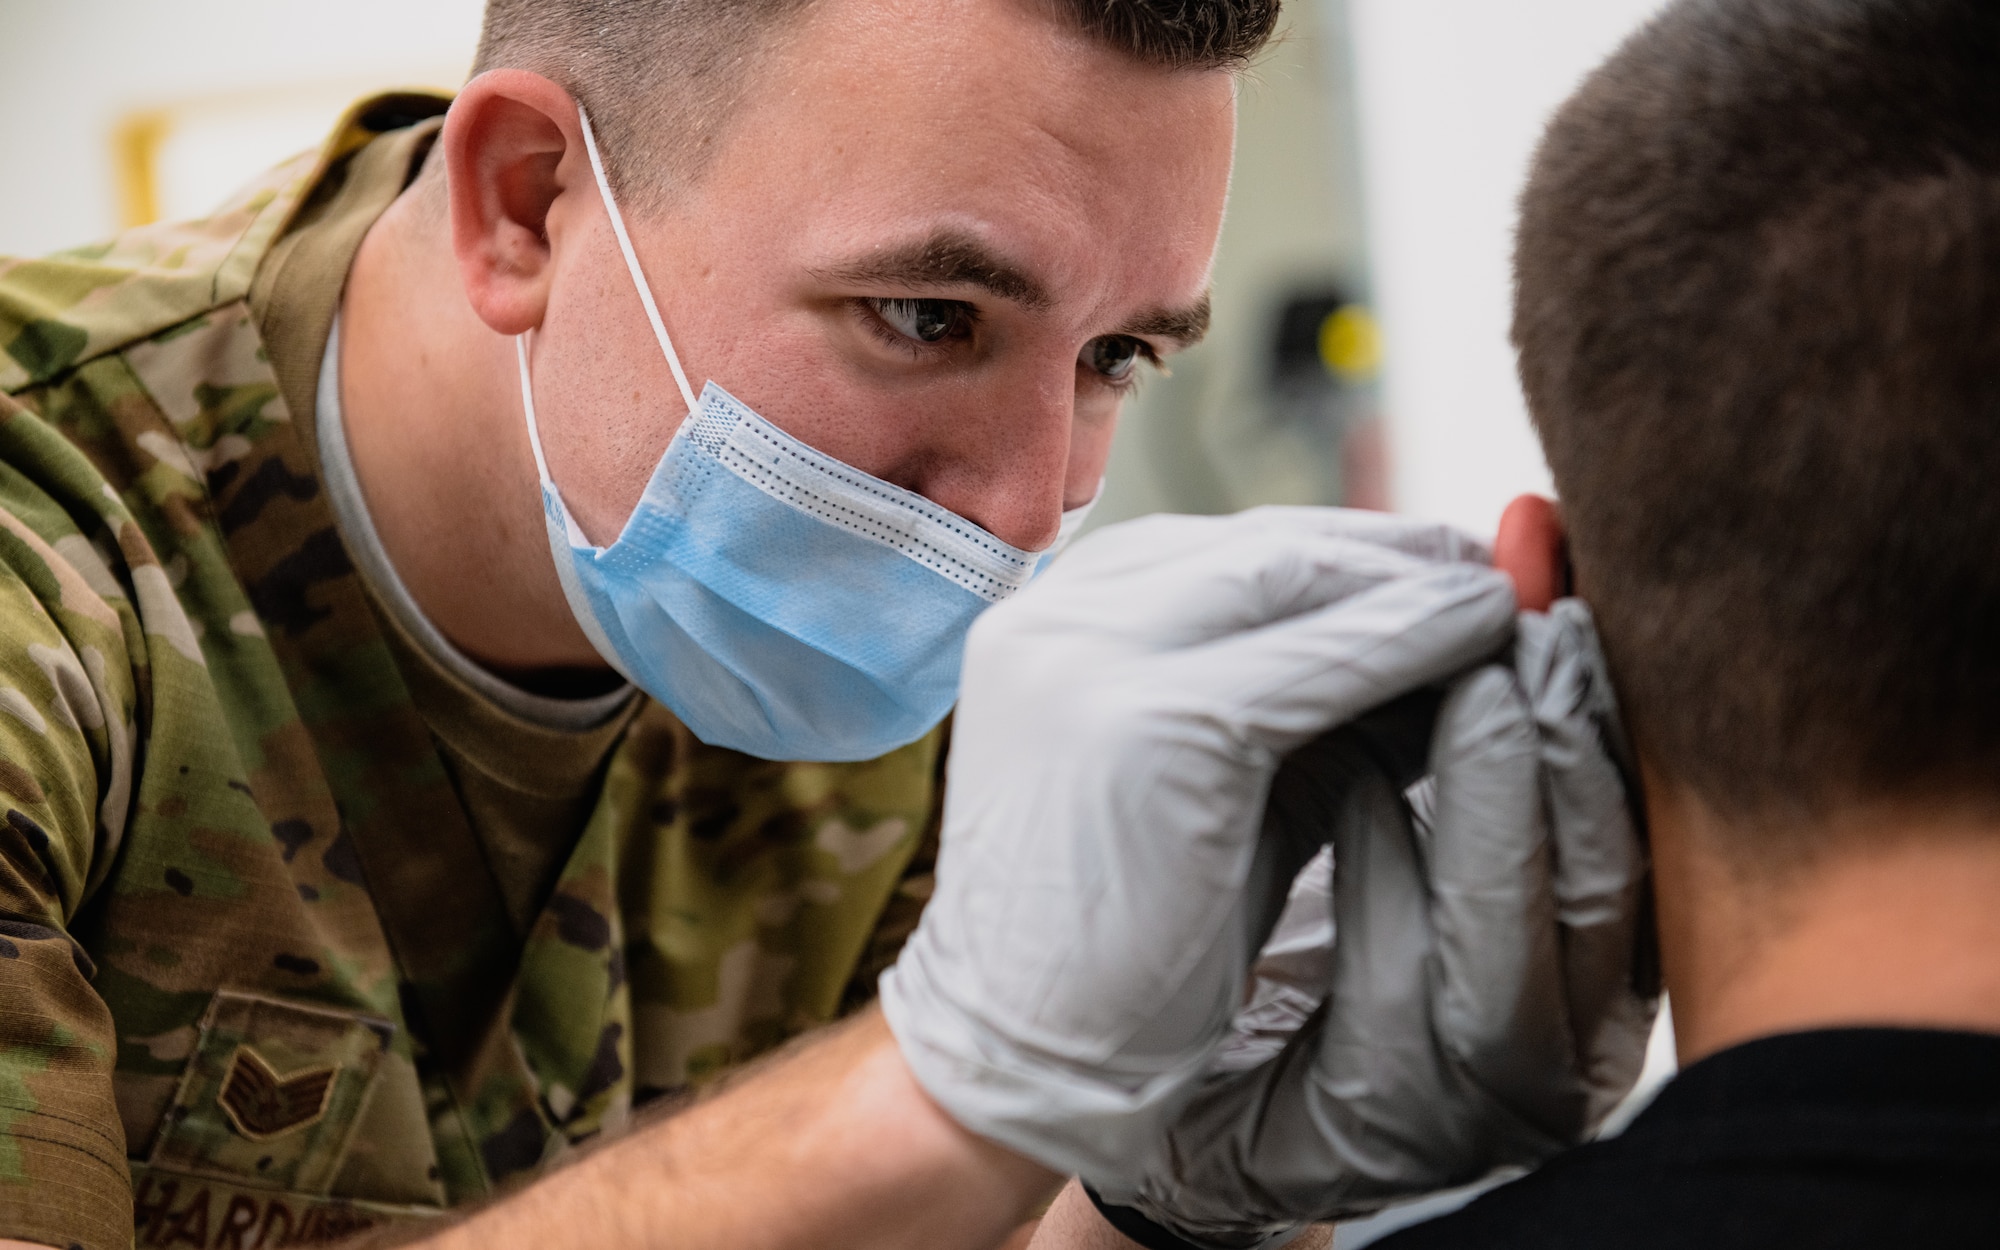 Airman performs acupuncture on soldier.